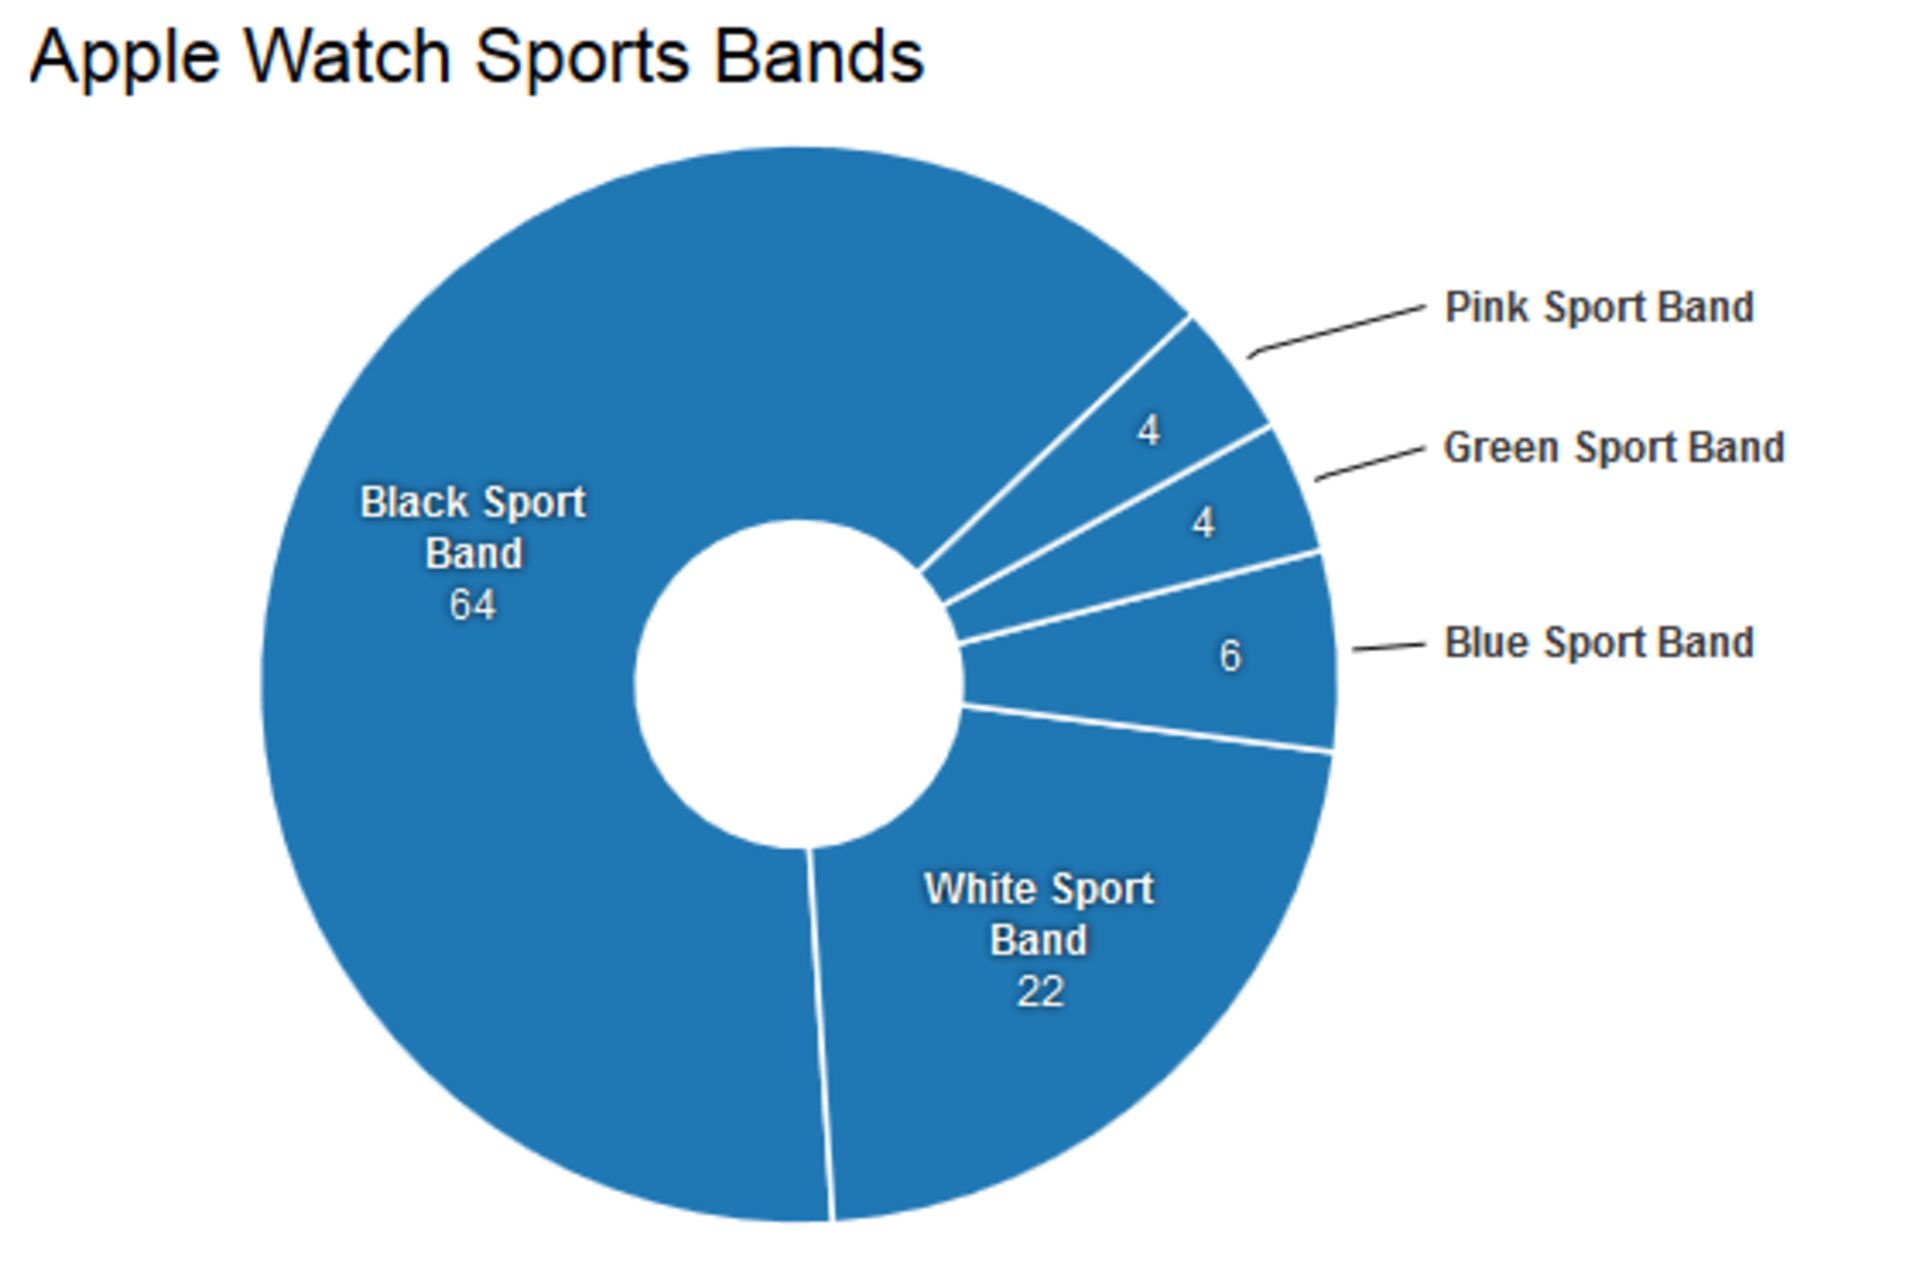 The-Black-Sport-Band-was-the-overwhelming-favorite-among-those-who-reserved-Apples-entry-level-Watches